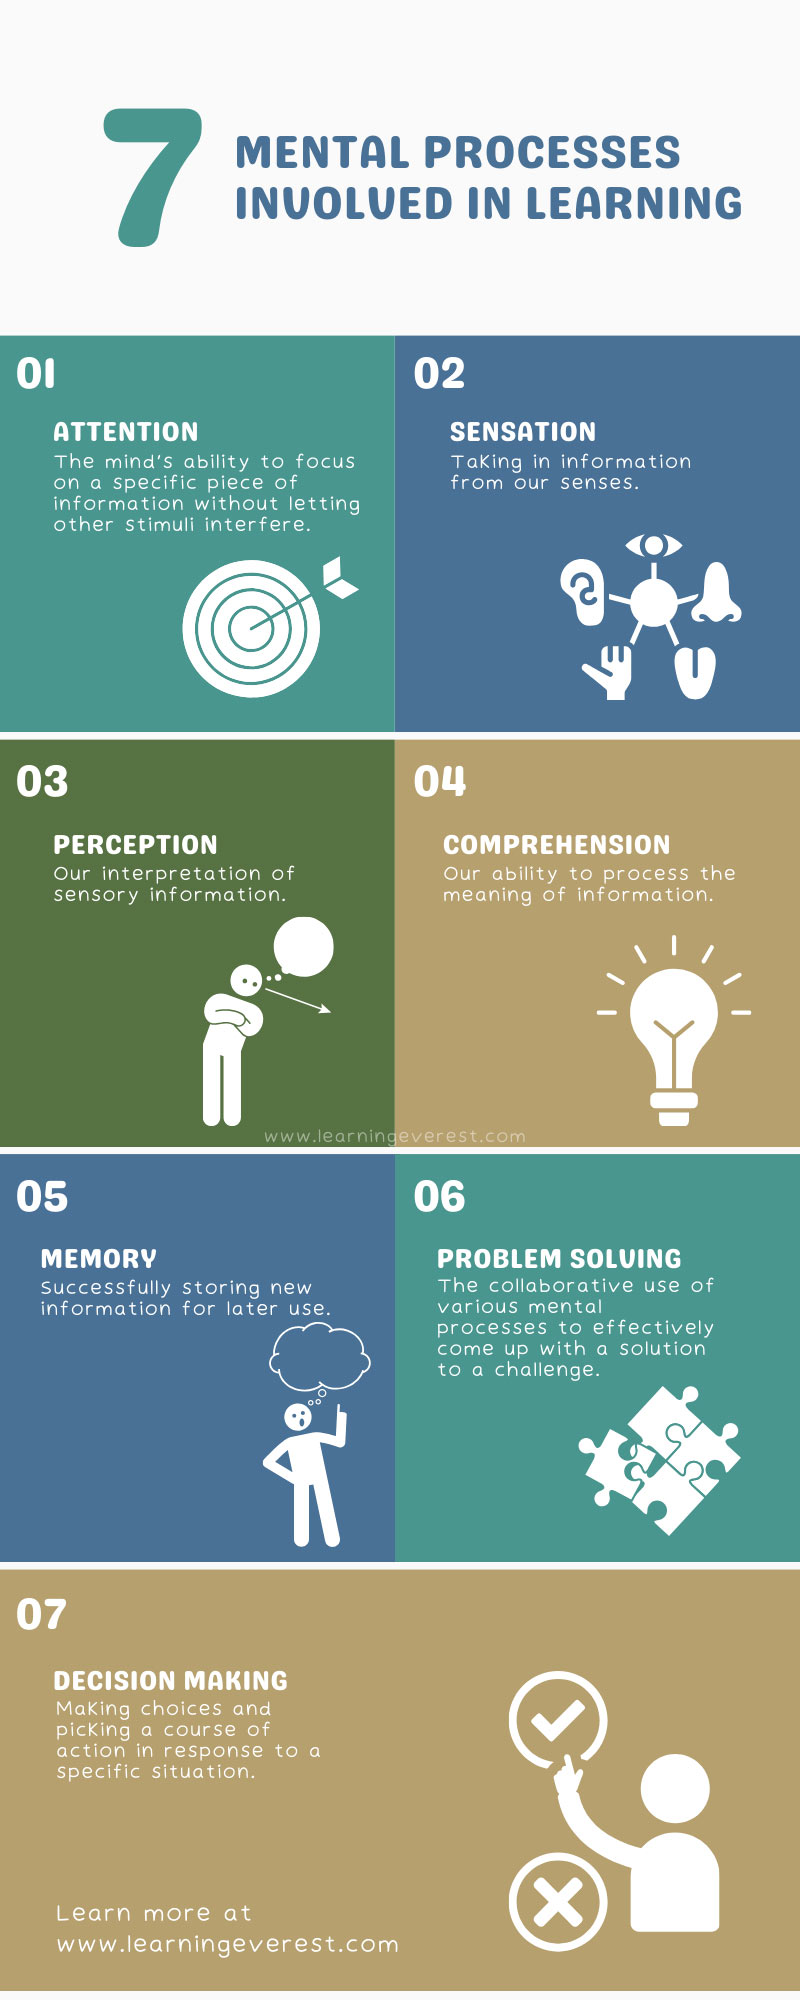 Understanding Cognitive Theory in Learning - 7 Mental Processes Involved in Learning